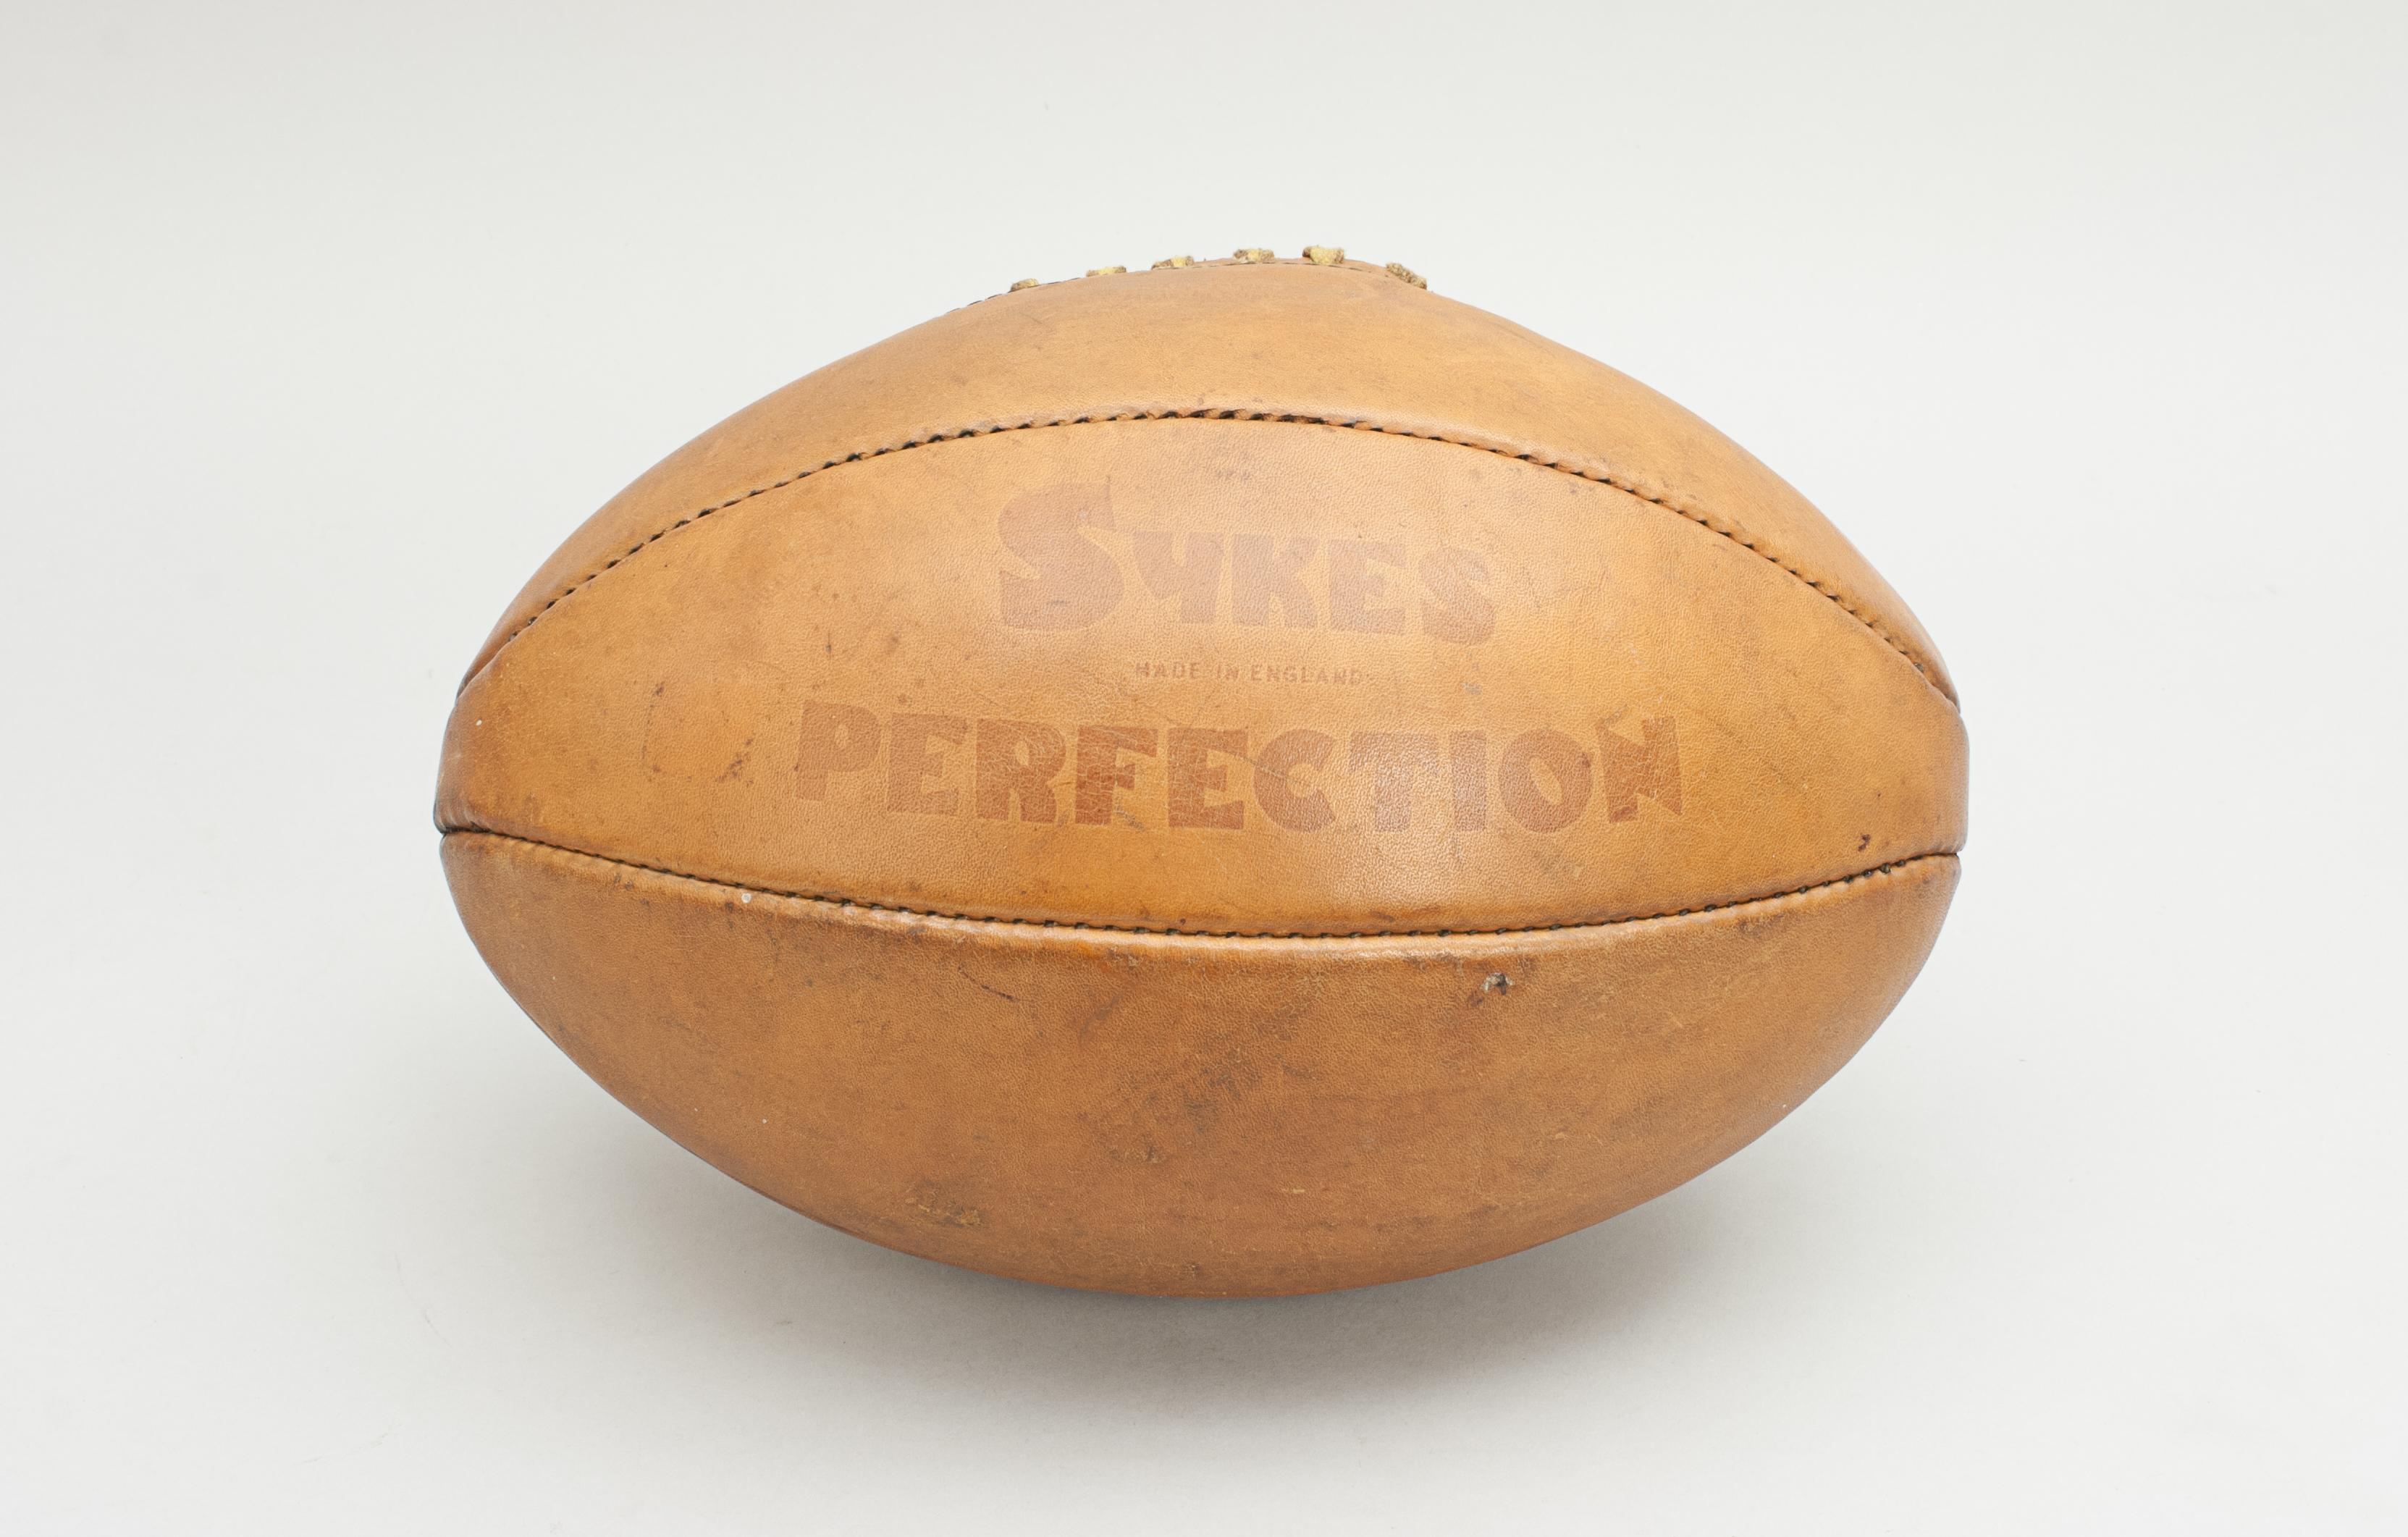 Sykes, perfection rugby ball.
A great looking traditional leather rugby made by Sykes. The ball with a lace-up slit to the top and made from six leather panels. A great ball, with excellent colour, stencilled, 'Sykes, made in England,